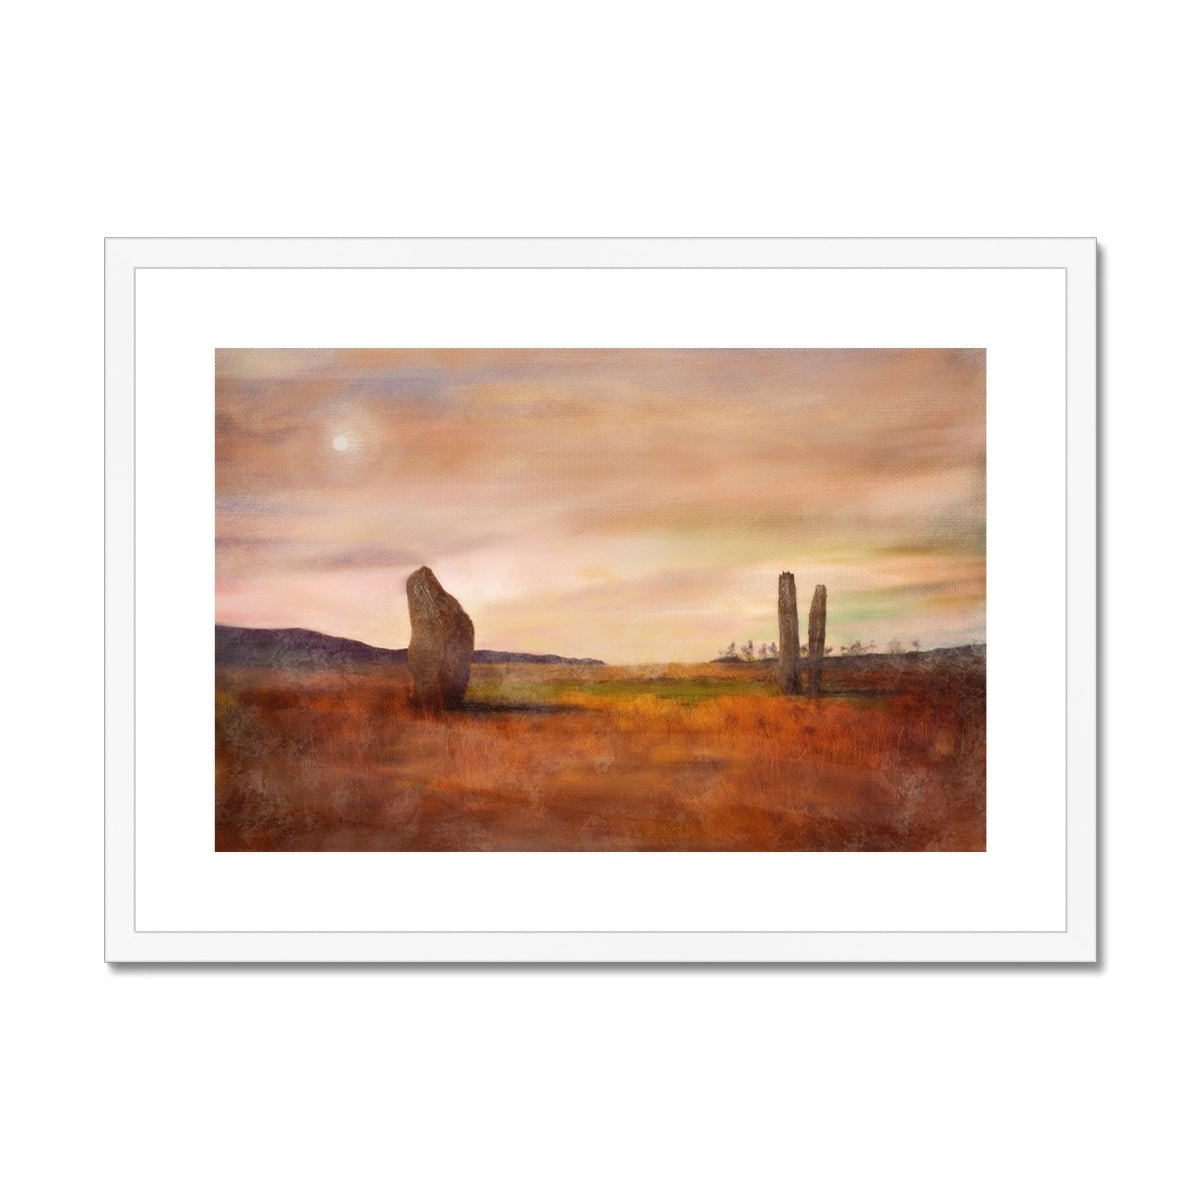 Machrie Moor Moonlight Painting | Framed & Mounted Prints From Scotland-Framed & Mounted Prints-Arran Art Gallery-A2 Landscape-White Frame-Paintings, Prints, Homeware, Art Gifts From Scotland By Scottish Artist Kevin Hunter